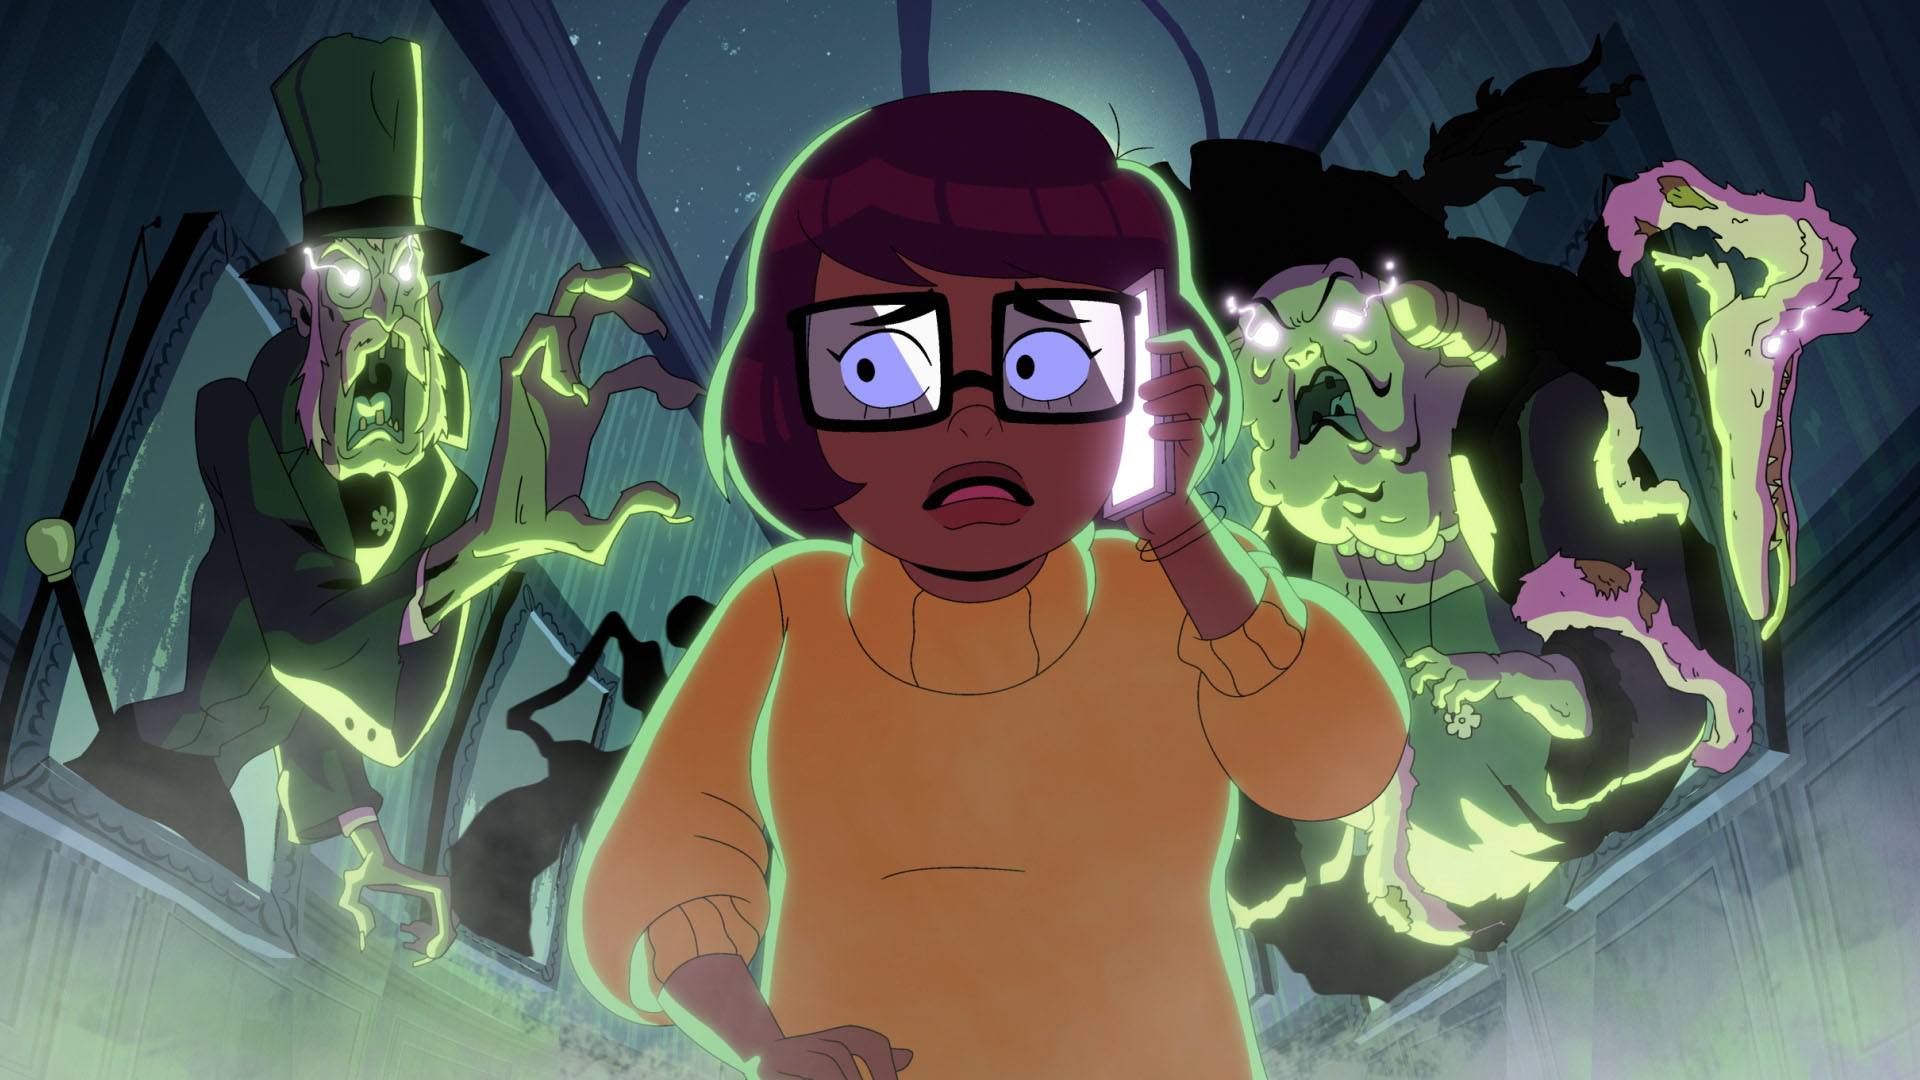 Velma surrounded by ghosts